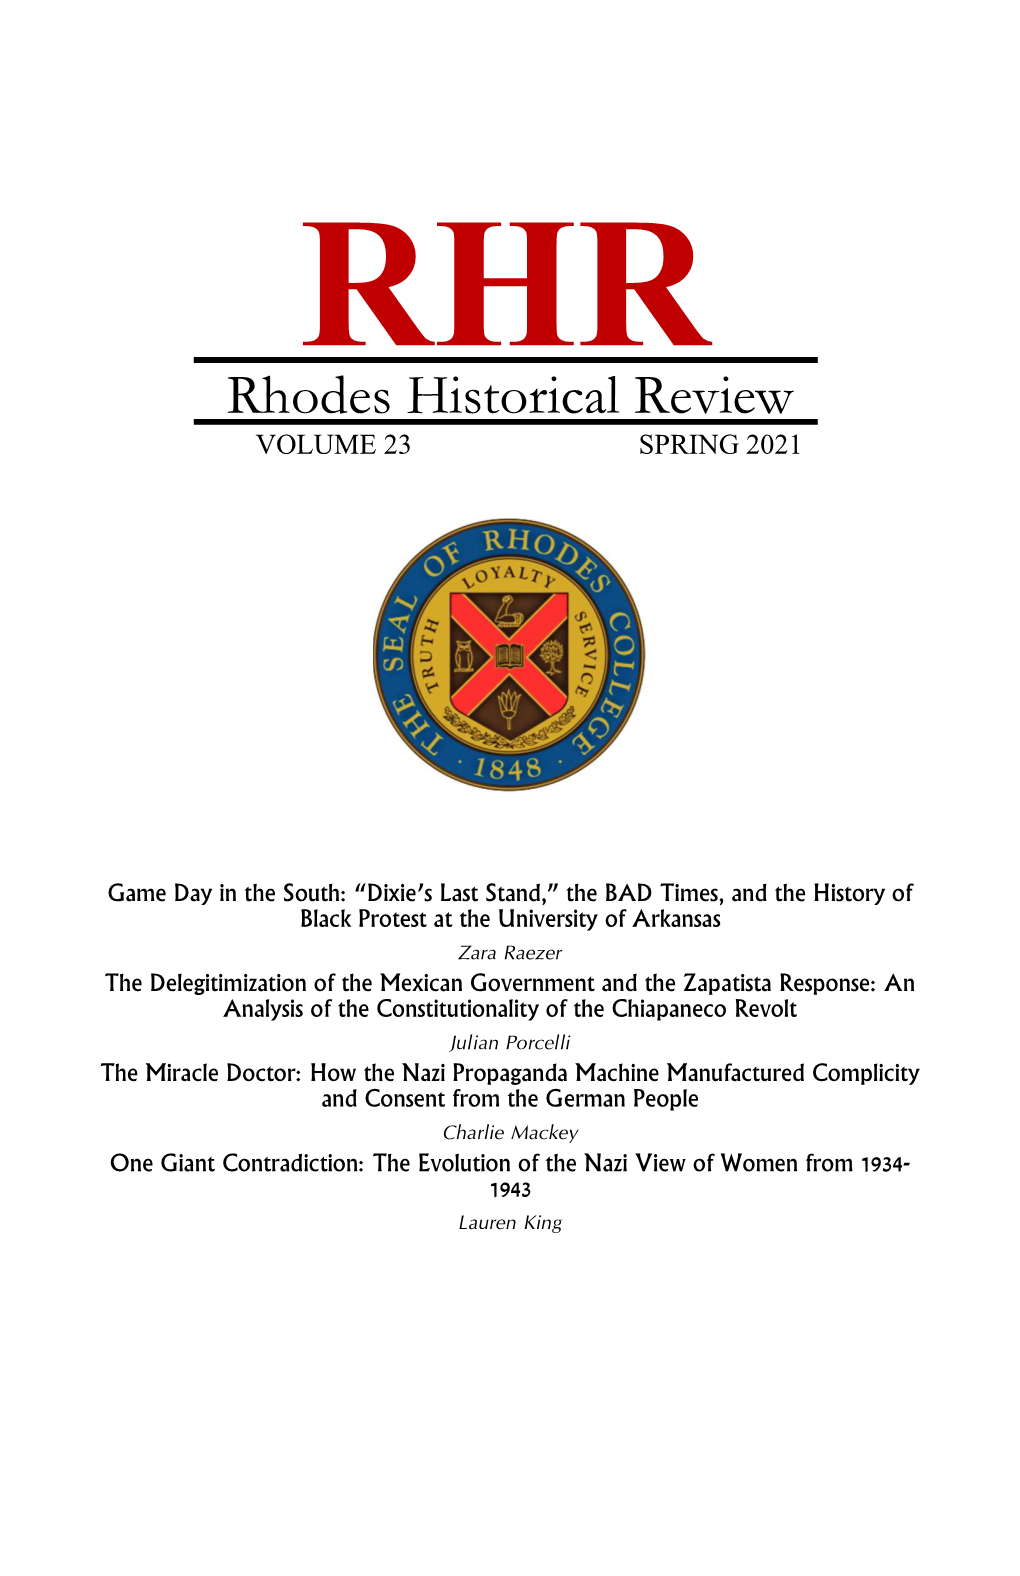 Rhodes Historical Review VOLUME 23 SPRING 2021